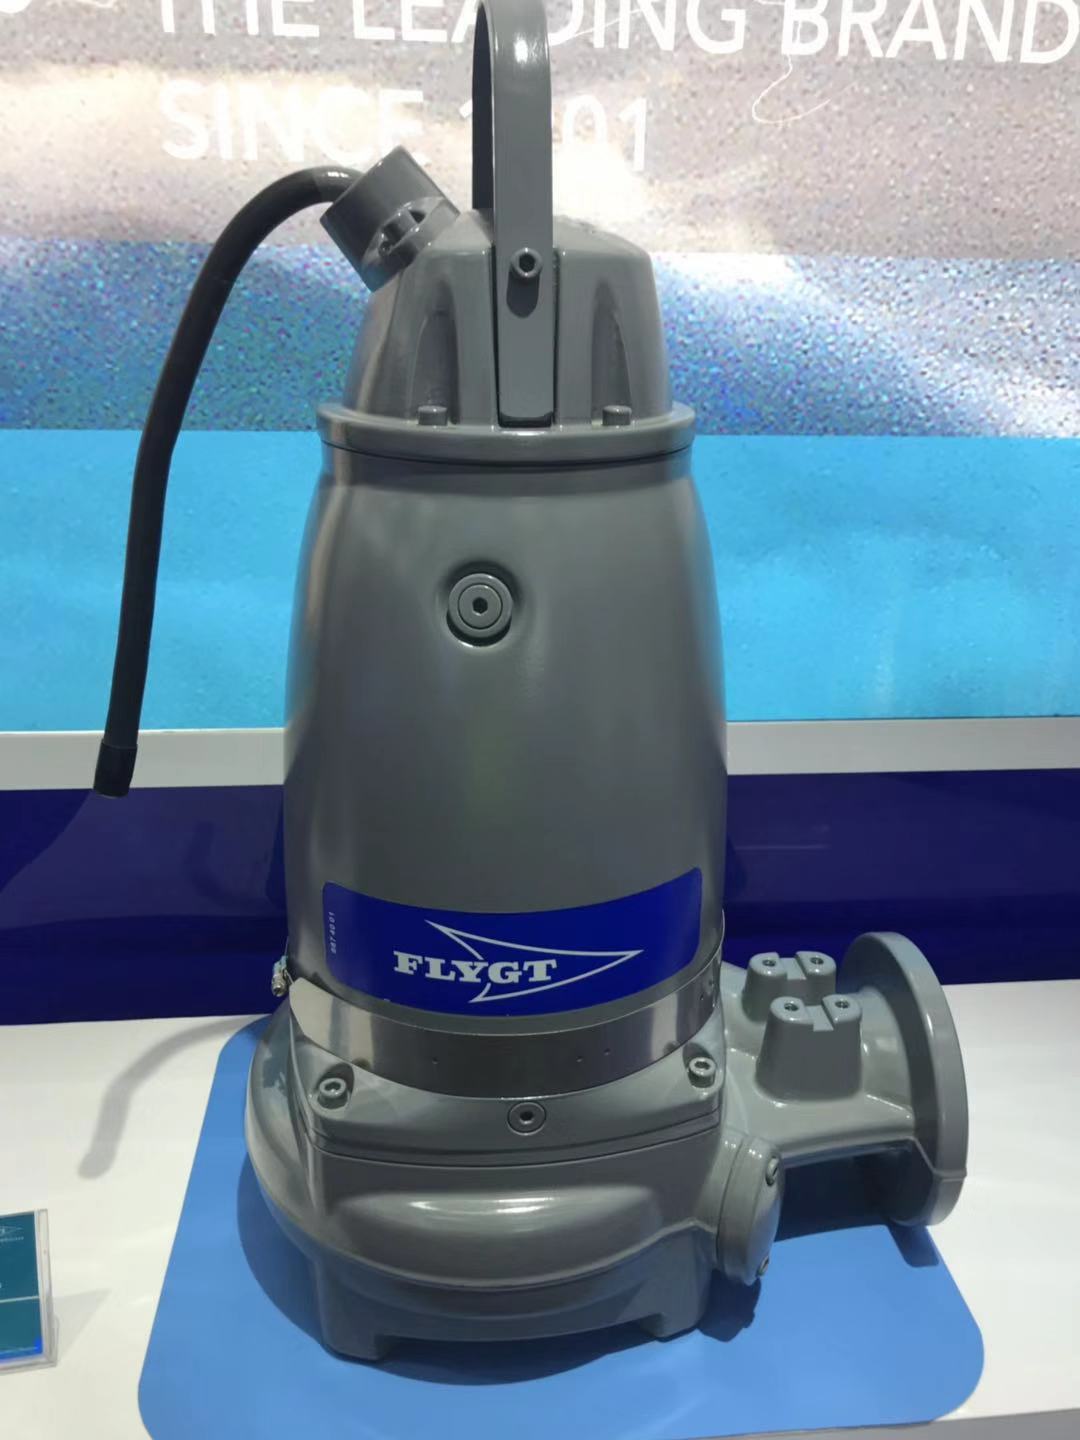 FLYGT submersible pump agents